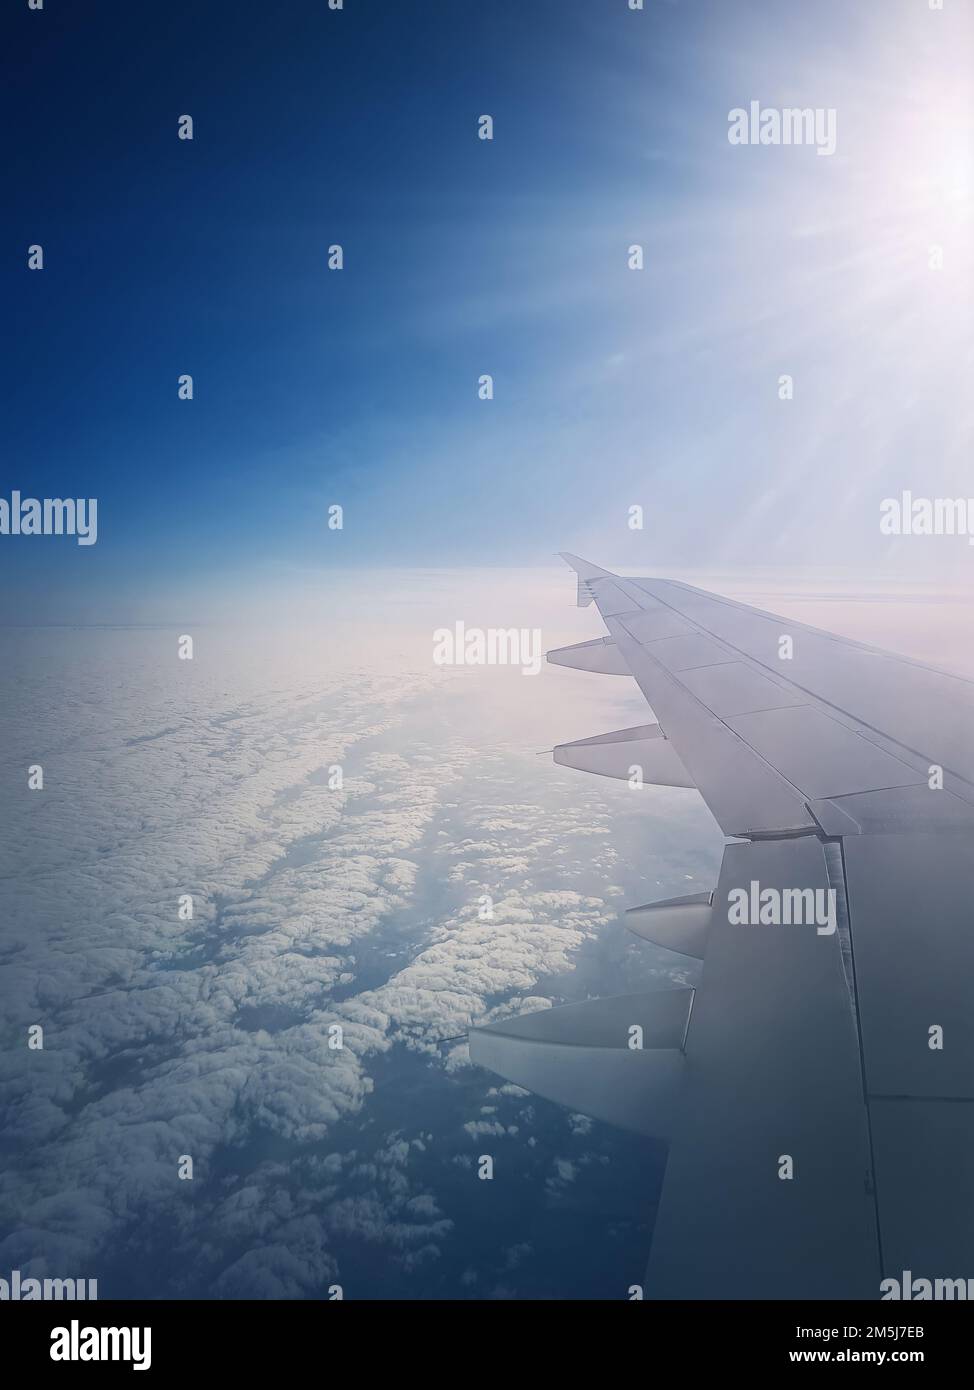 Plane flight above the clouds. Blue skyline and airplane wing seen through the window Stock Photo